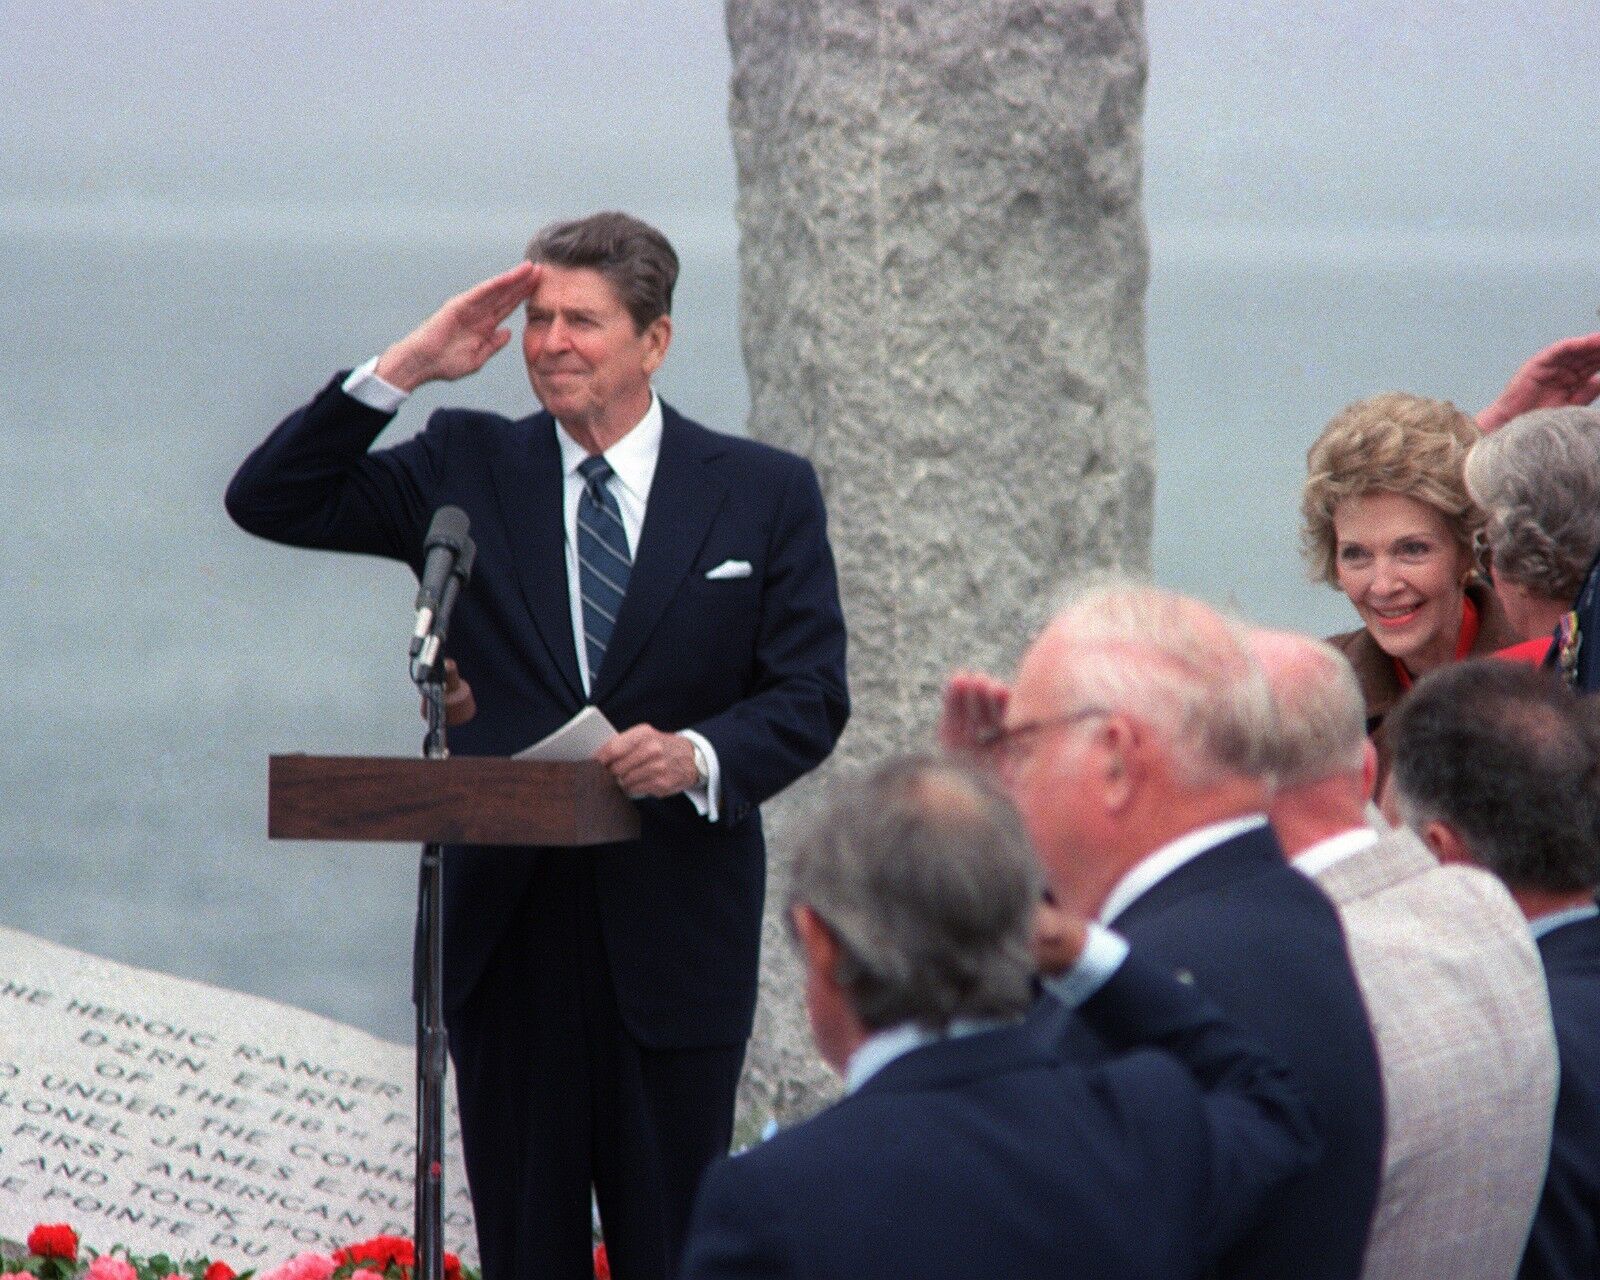 RONALD REAGAN IN NORMANDY FRANCE 40TH ANNIVERSARY OF D-DAY - 8X10 PHOTO (AA-055)